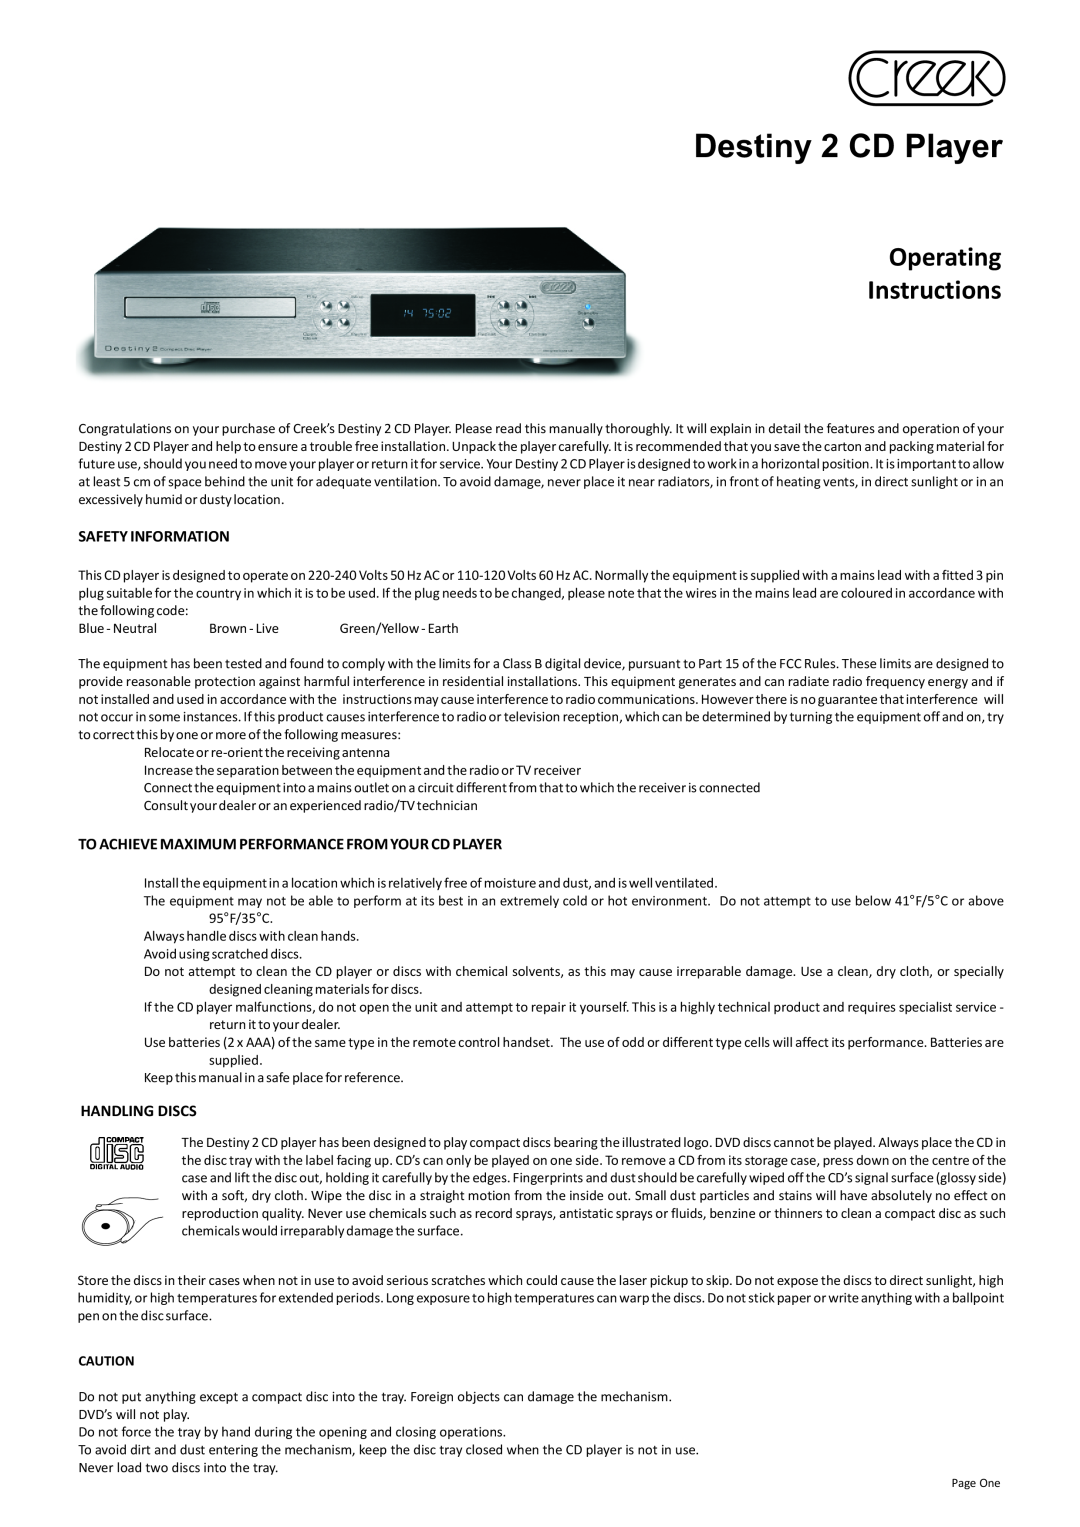 Creek Audio manual Destiny 2 CD Player, Safety Information, Handling Discs, Operating Instructions 